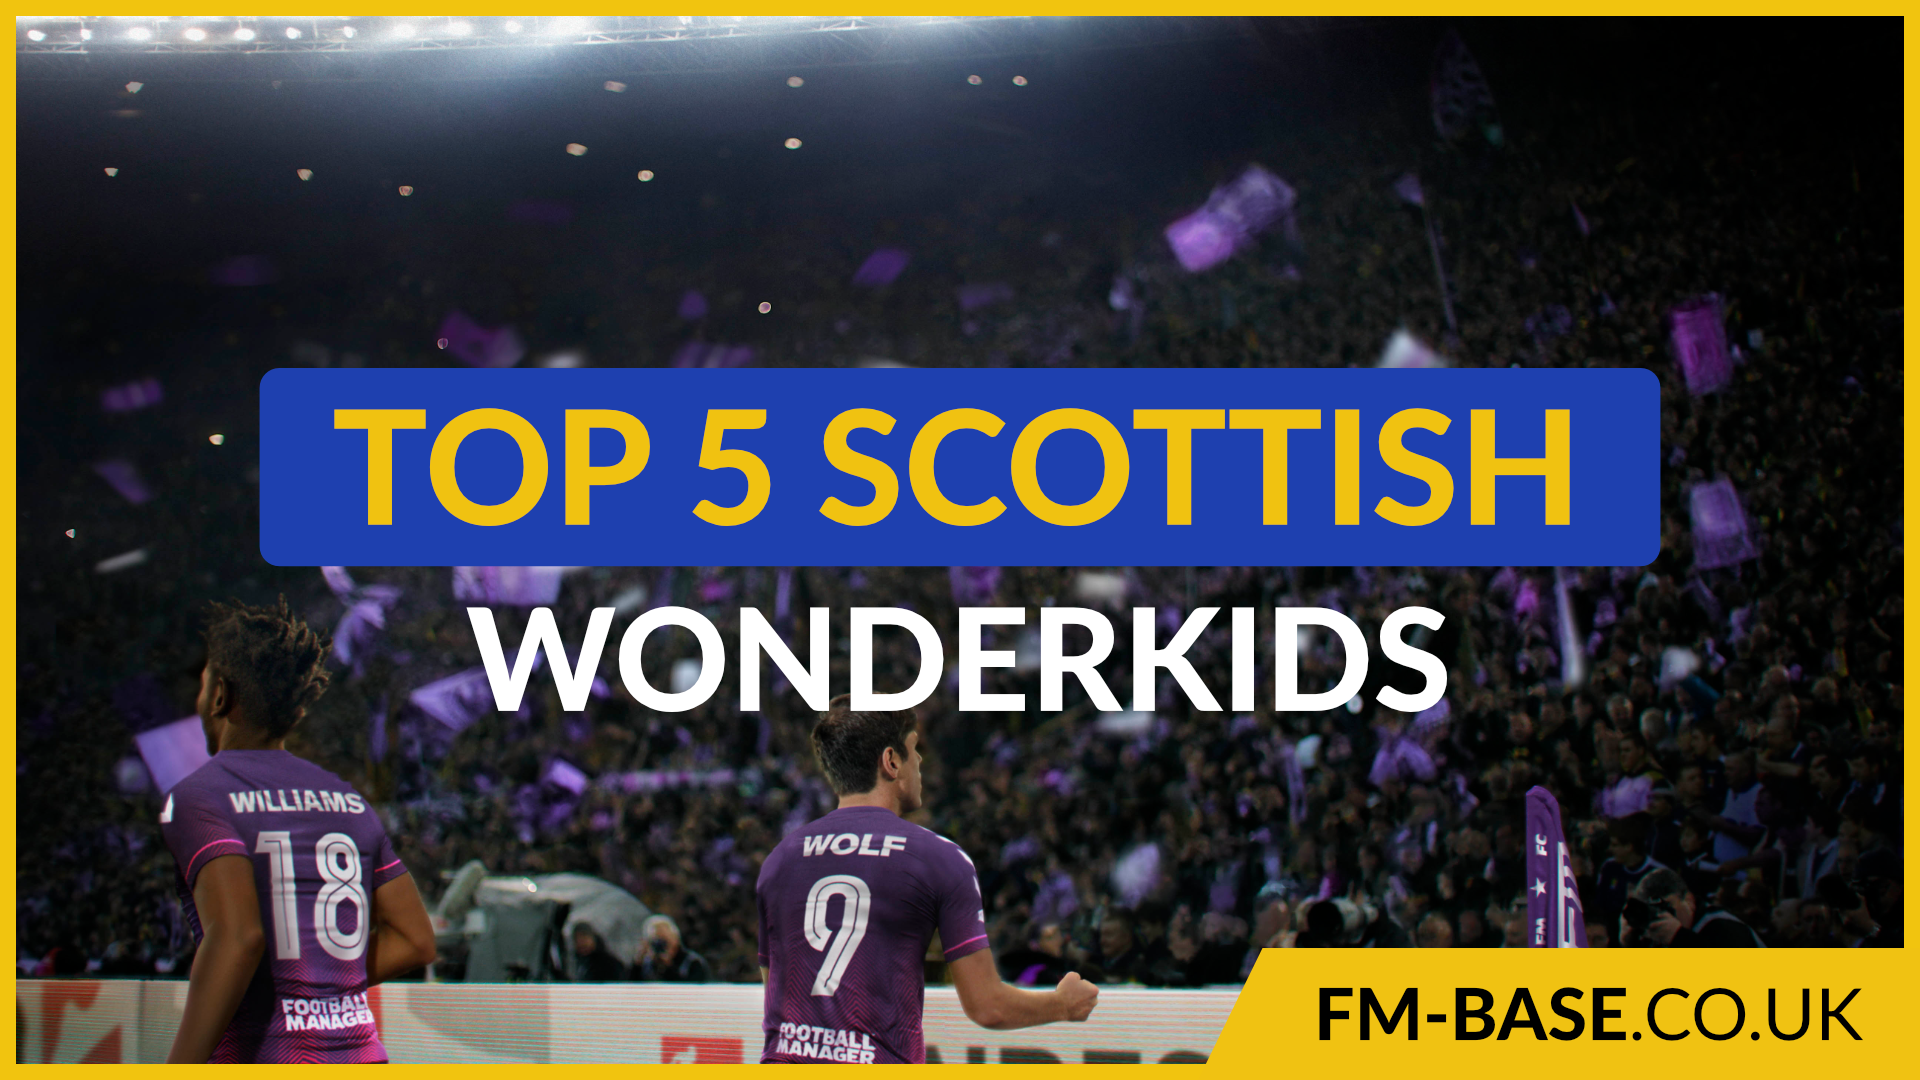 The Top 5 Scottish Wonderkids in Football Manager 2022